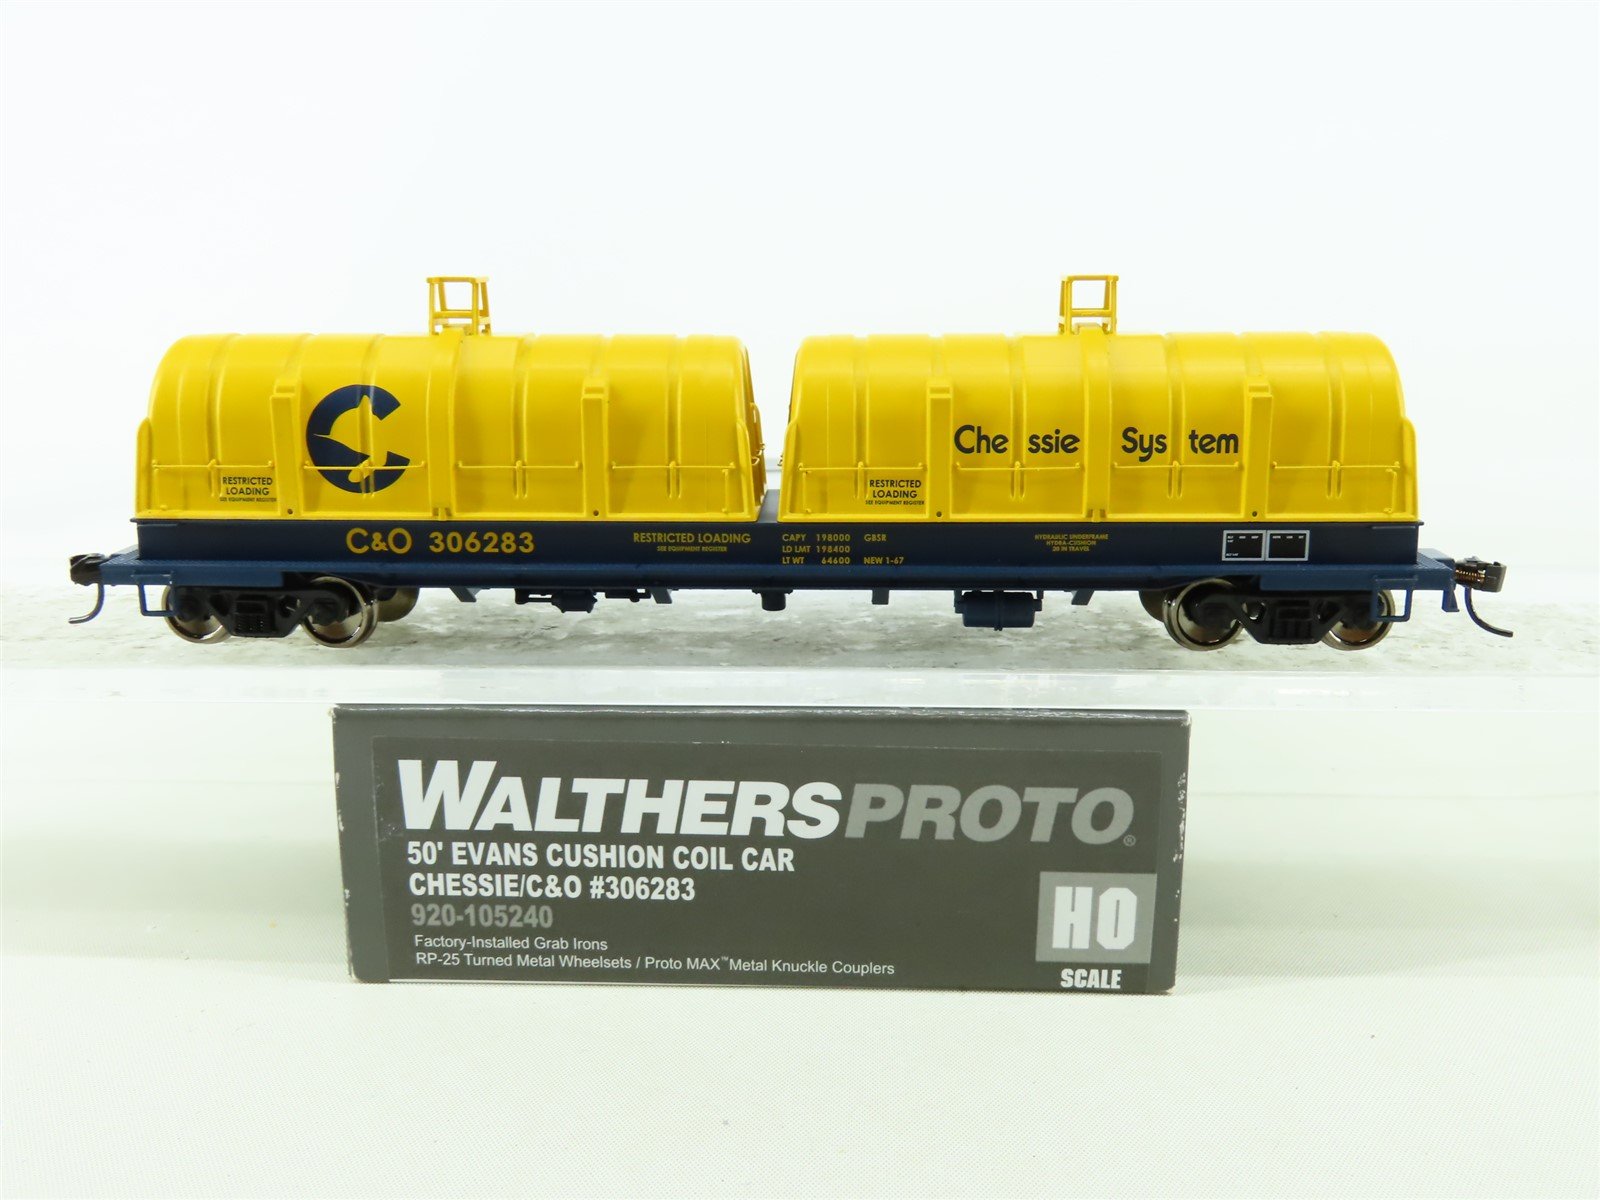 HO Scale Walthers Proto 920-105240 C&O Chessie System 50' Coil Car #306283